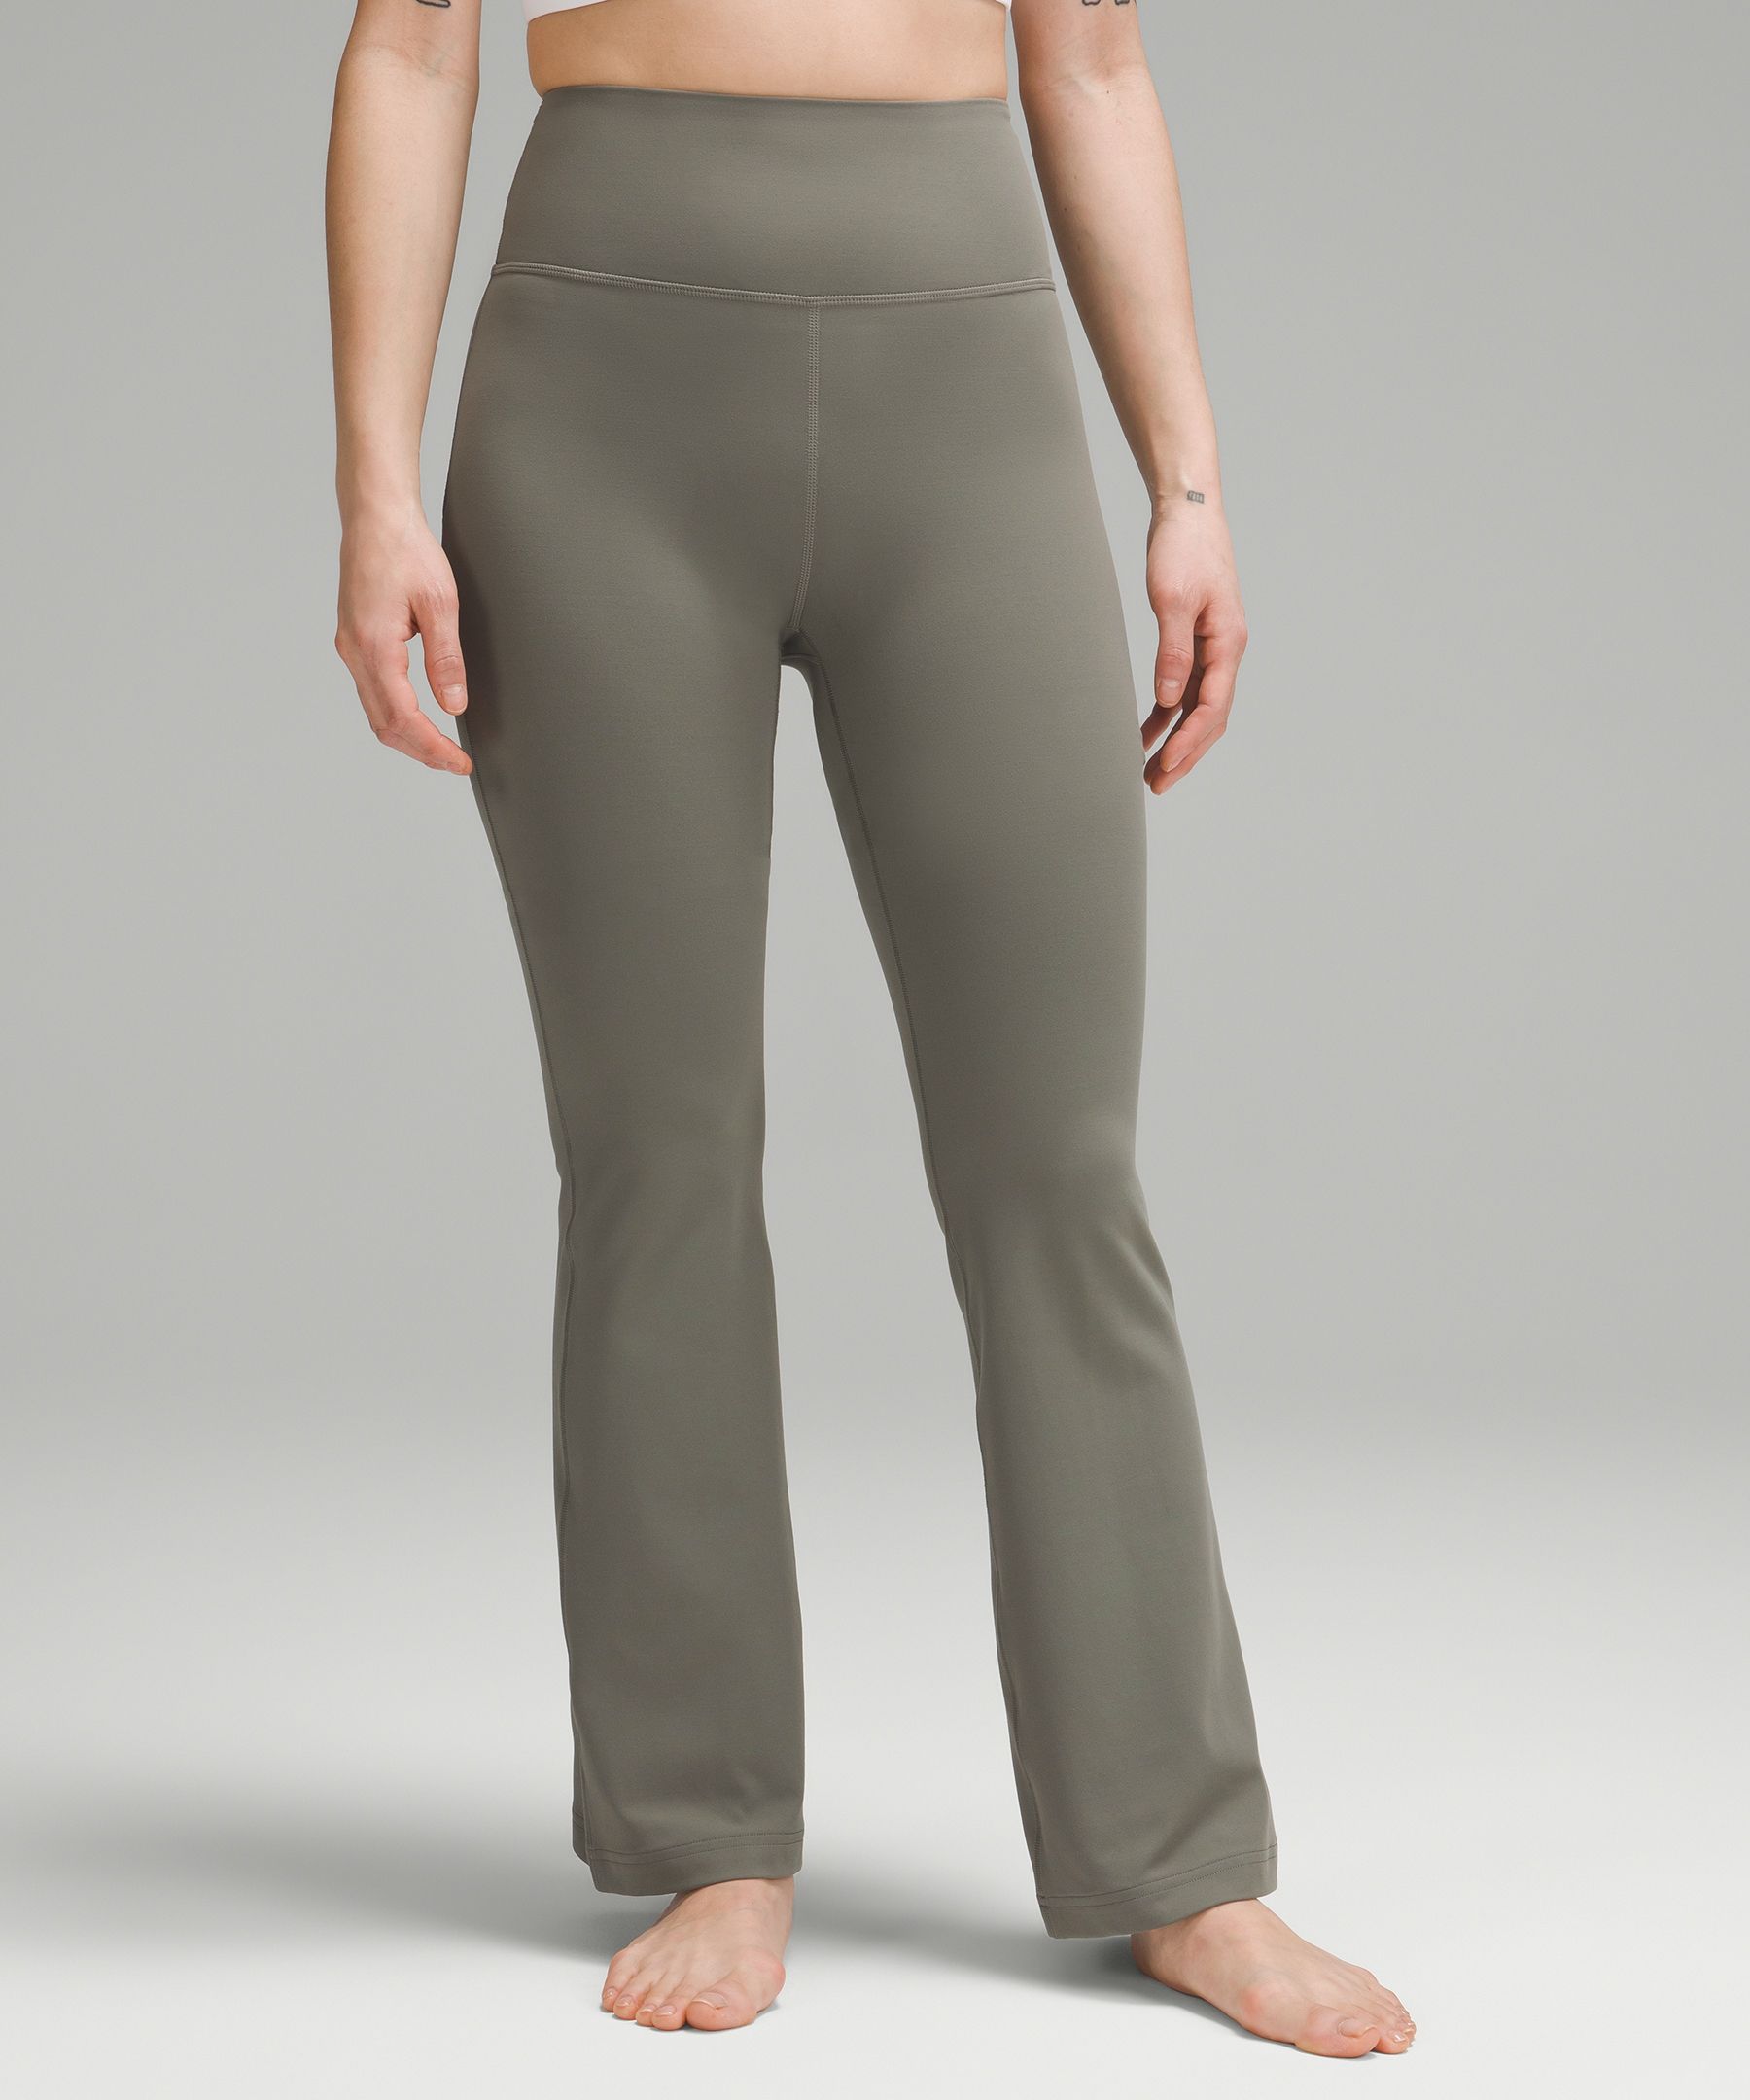 Lululemon Smoked Spruce Groove pants Green Size 4 - $45 - From Lauren